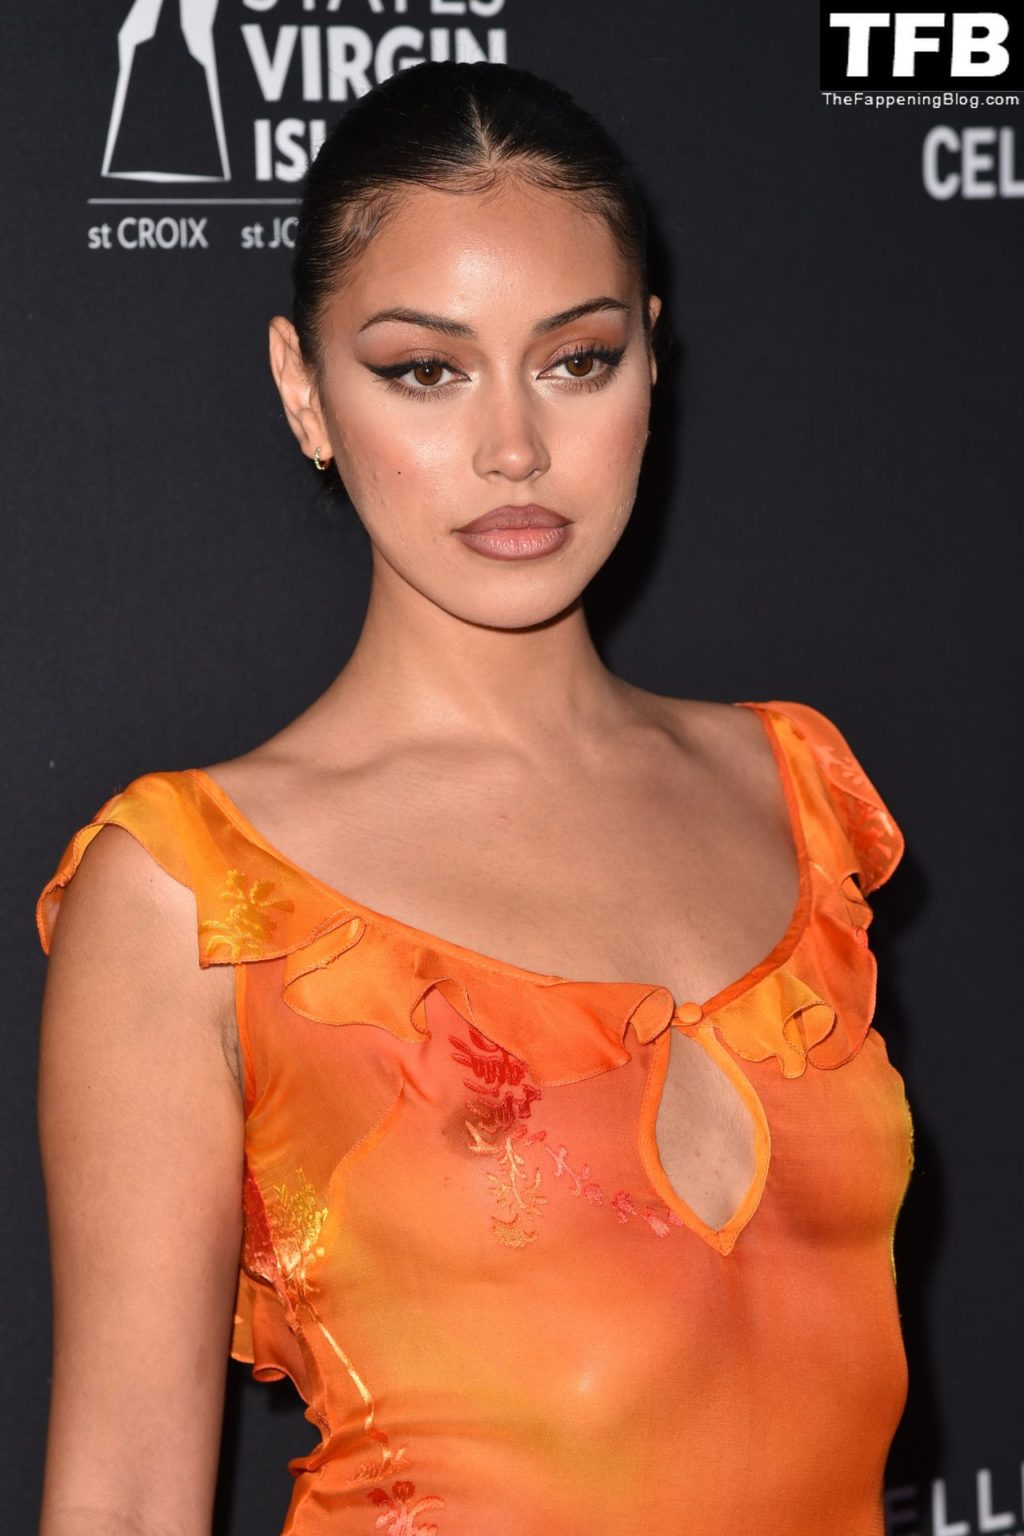 Cindy Kimberly See Through Nudity The Fappening Blog 14 1 1024x1536 - Cindy Kimberly Displays Her Nude Tits in a See-Through Dress at the Sports Illustrated Swimsuit Issue Launch Party (17 Photos)